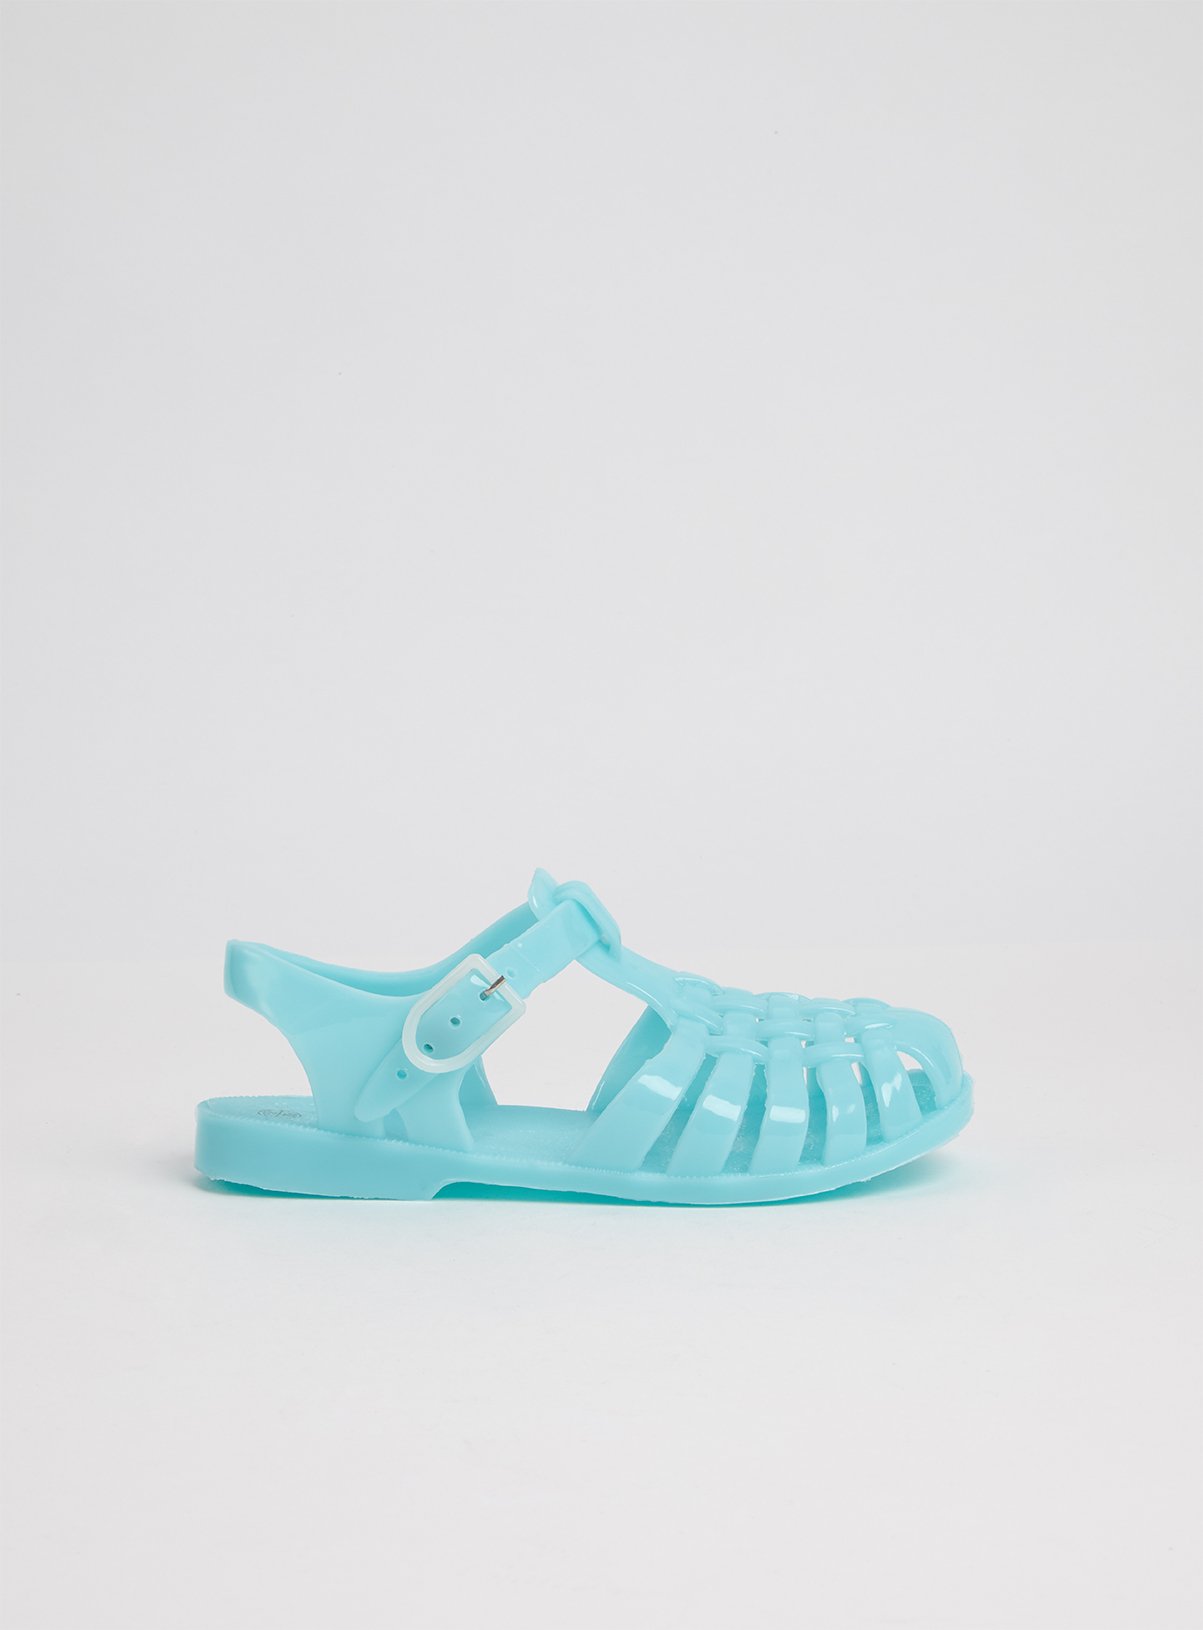 Blue Jelly Sandals Review